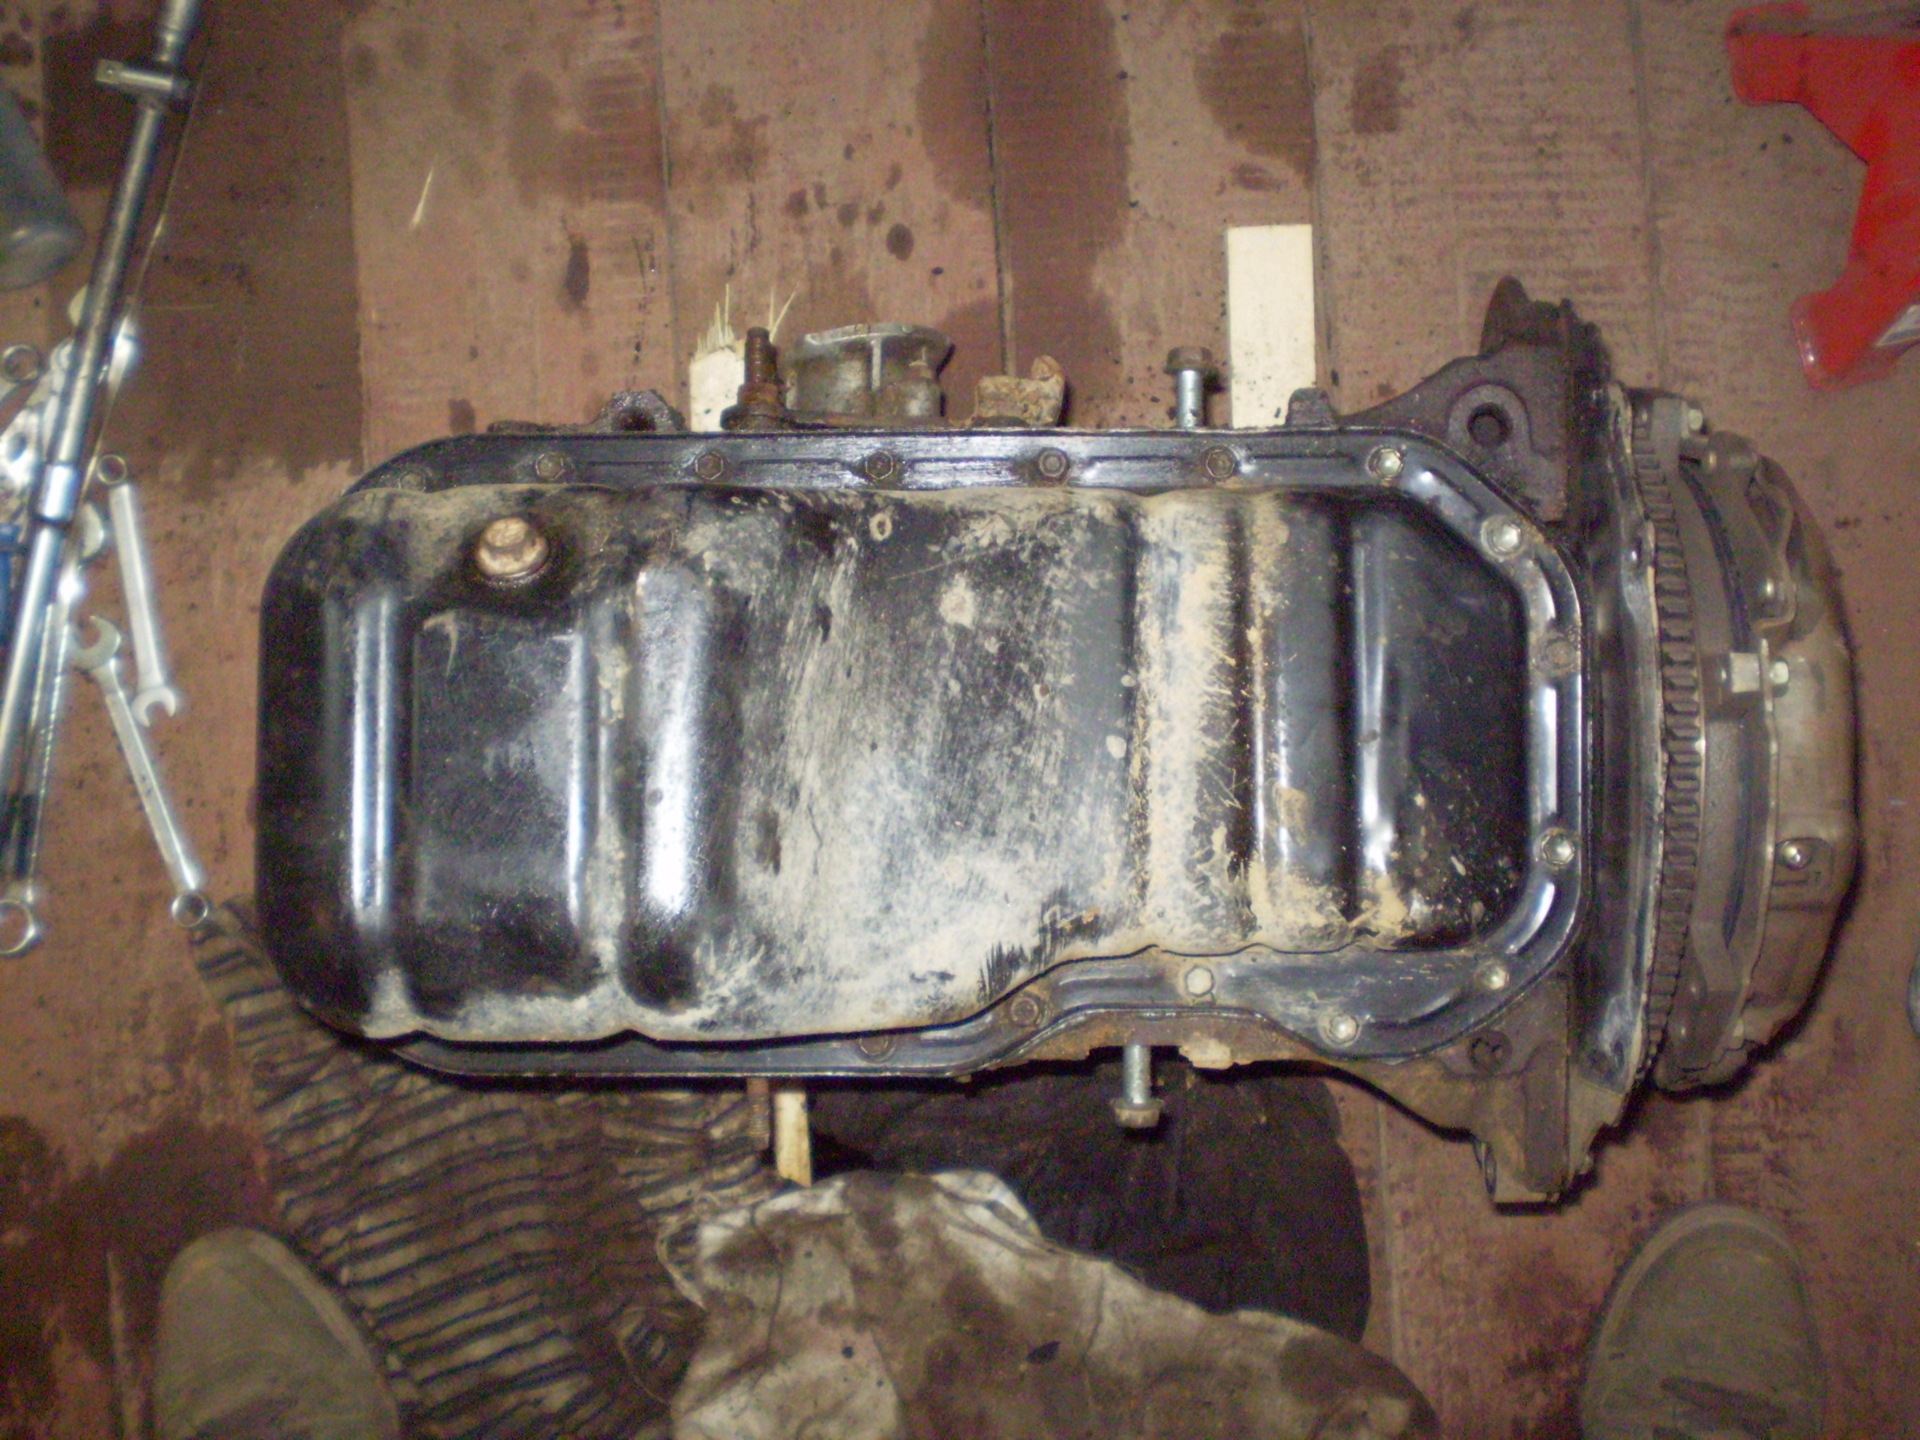 6 Well what what  - Capital  4A-GE BT  1 - Toyota Sprinter Trueno 16 L 1998